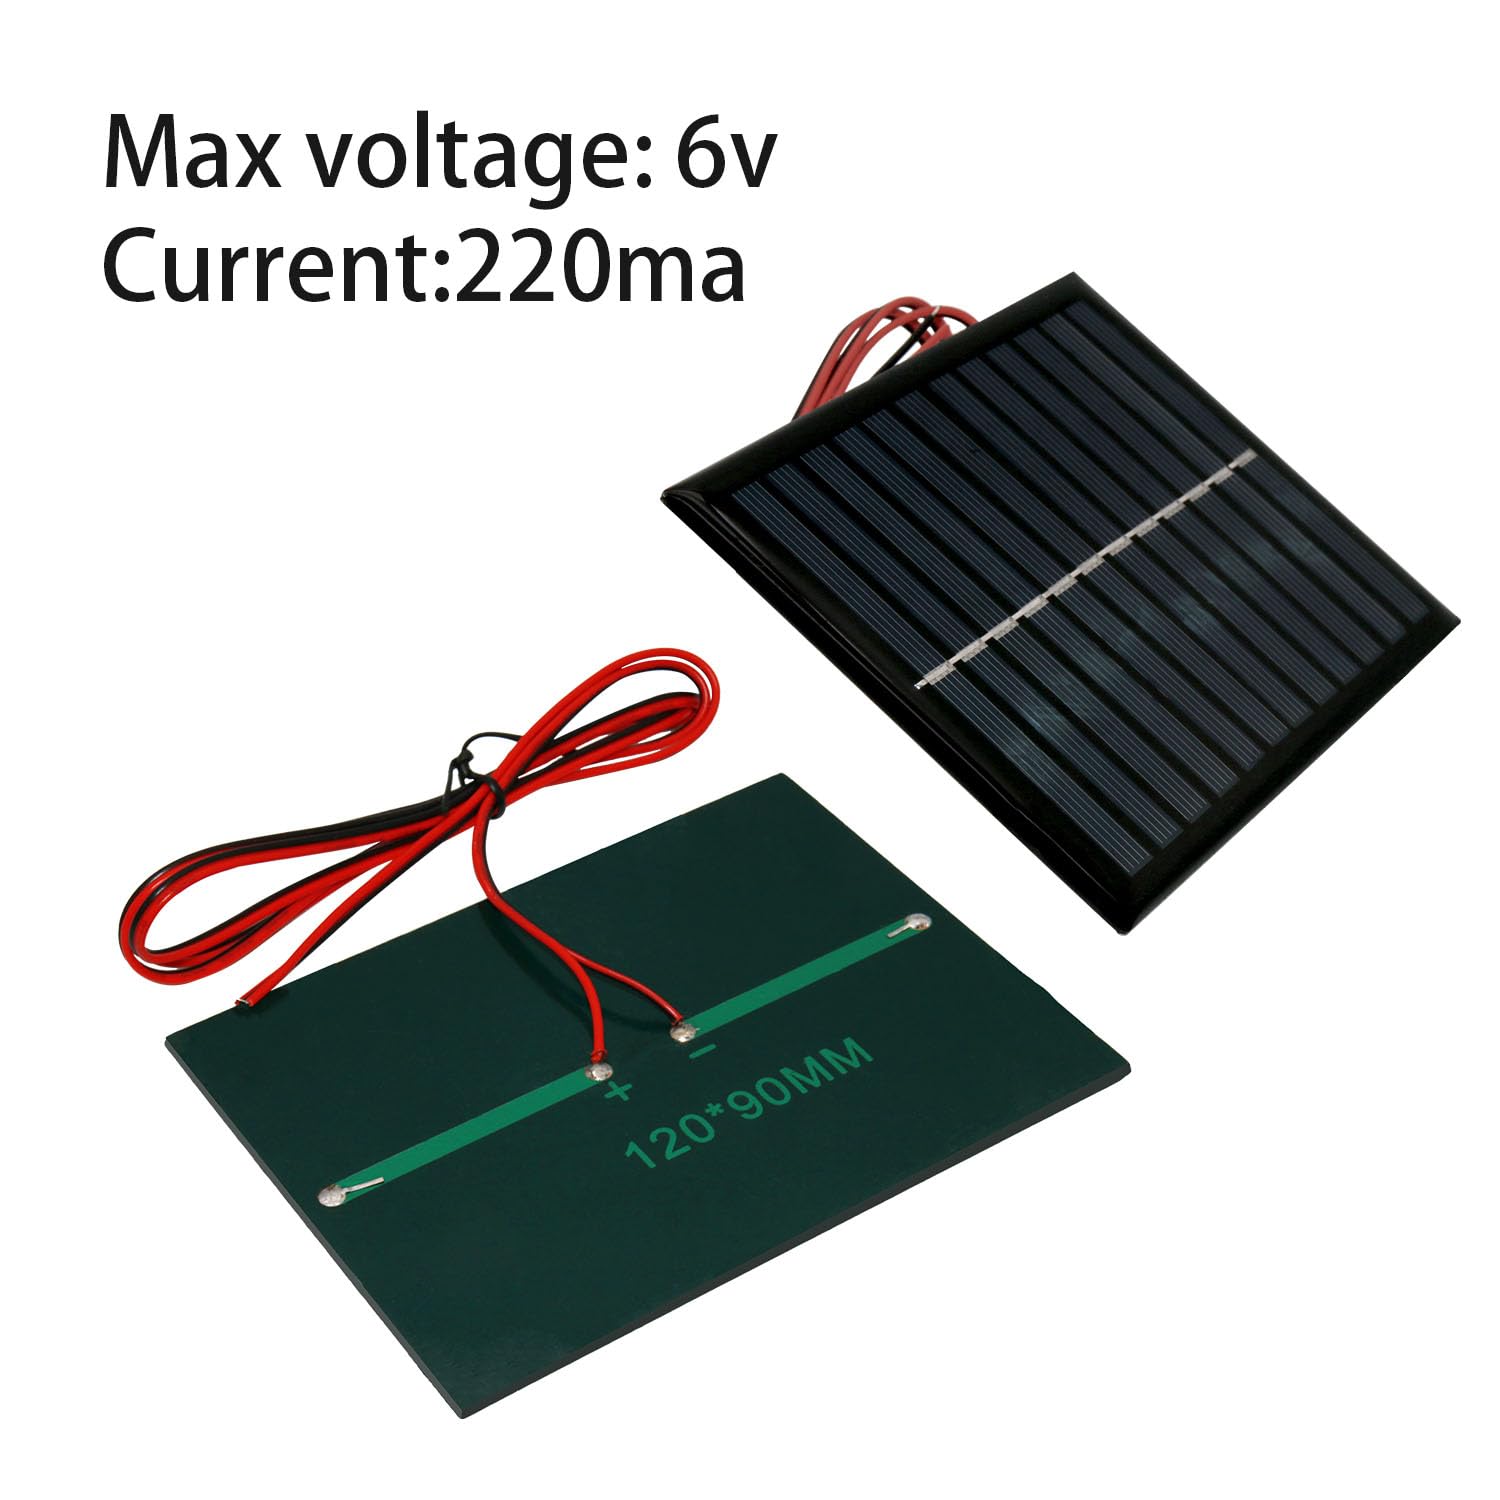 2Pcs Mini Solar Panels for Solar Power, 6V 220mA Mini Solar Panel Kit DIY Electric Toy Photovoltaic Cells Solar Epoxy Cell Charger with 1 Meter Wire 4.72"*3.54"(120mm*90mm)